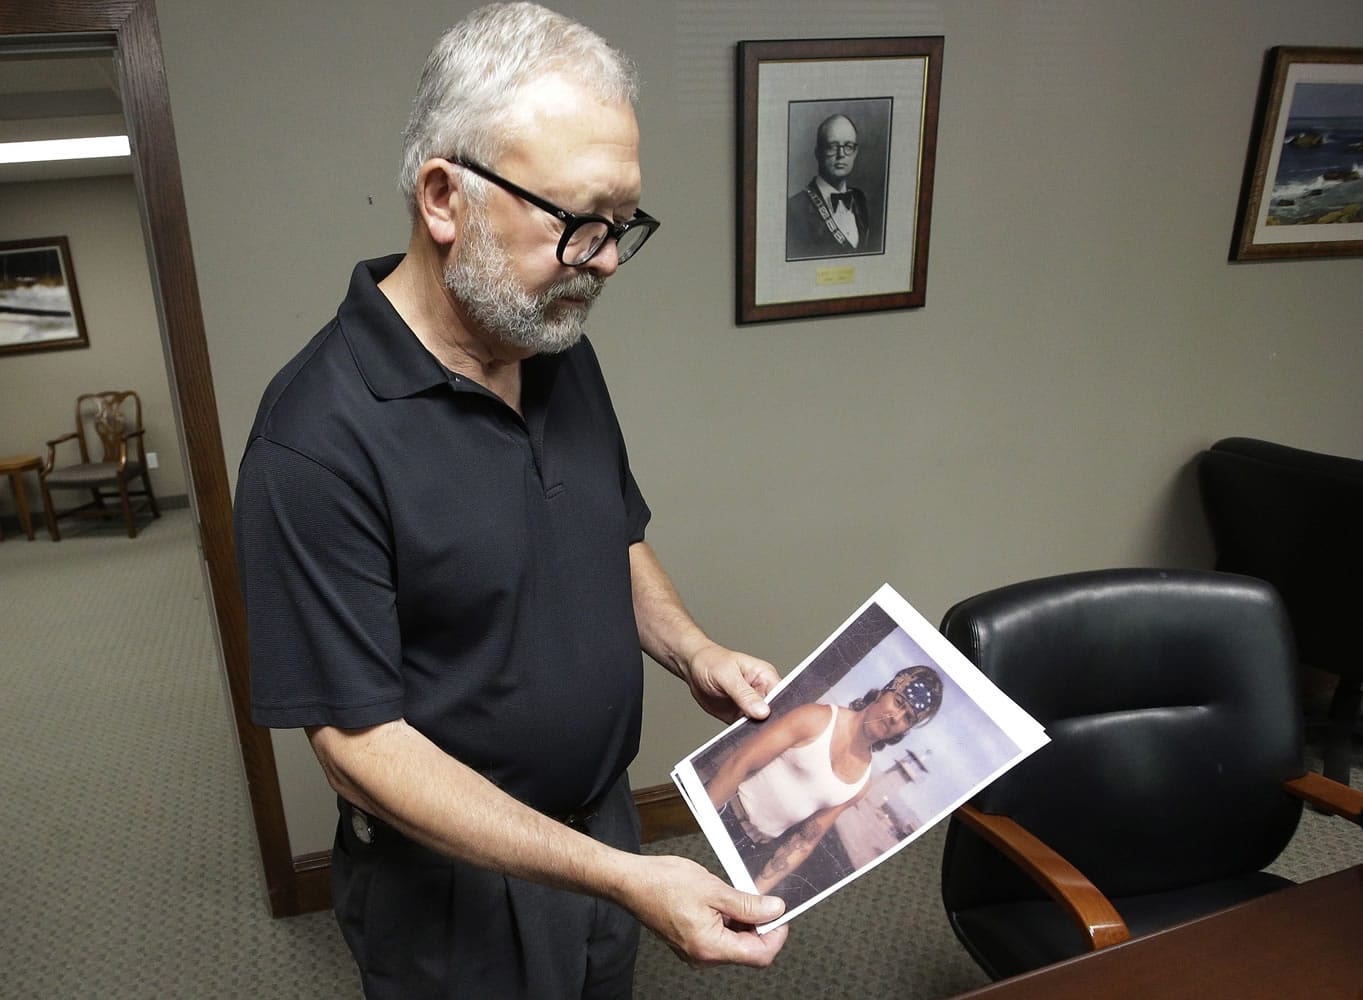 Salt Lake City attorney Jesse Trentadue holds a photograph of his brother taken in the early 1980s showing his dragon tattoo on his left forearm.